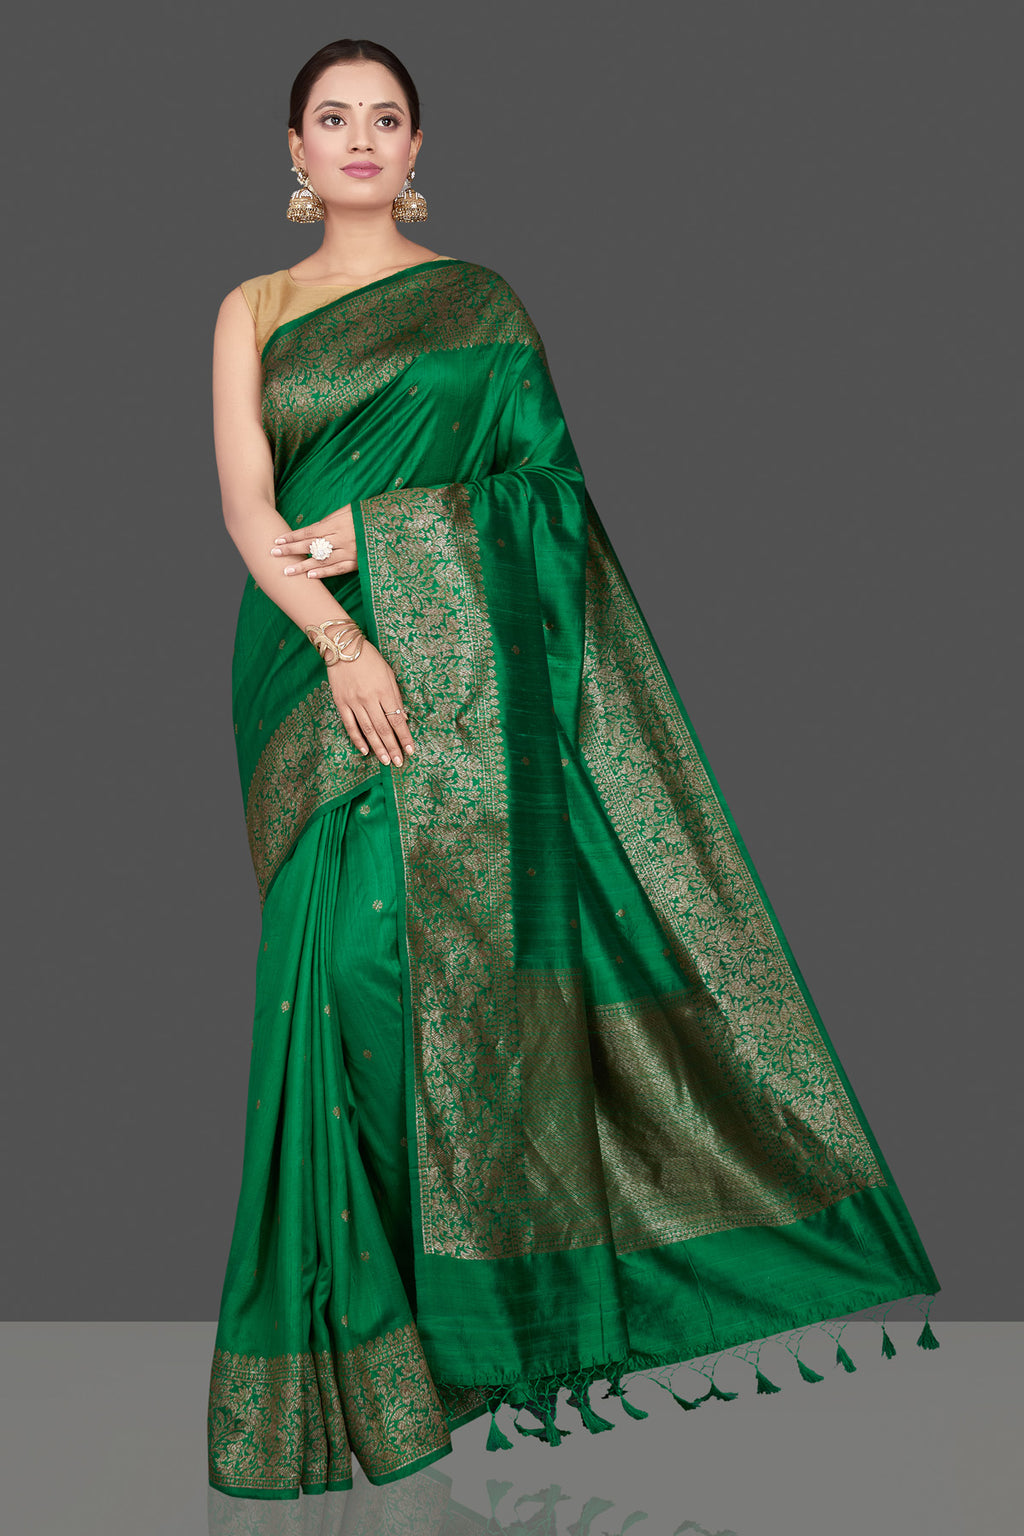 Buy gorgeous green tussar Banarasi sari online in USA with antique zari border. Go for stunning Indian designer sarees, georgette sarees, handwoven saris, embroidered sarees for festive occasions and weddings from Pure Elegance Indian clothing store in USA.-full view